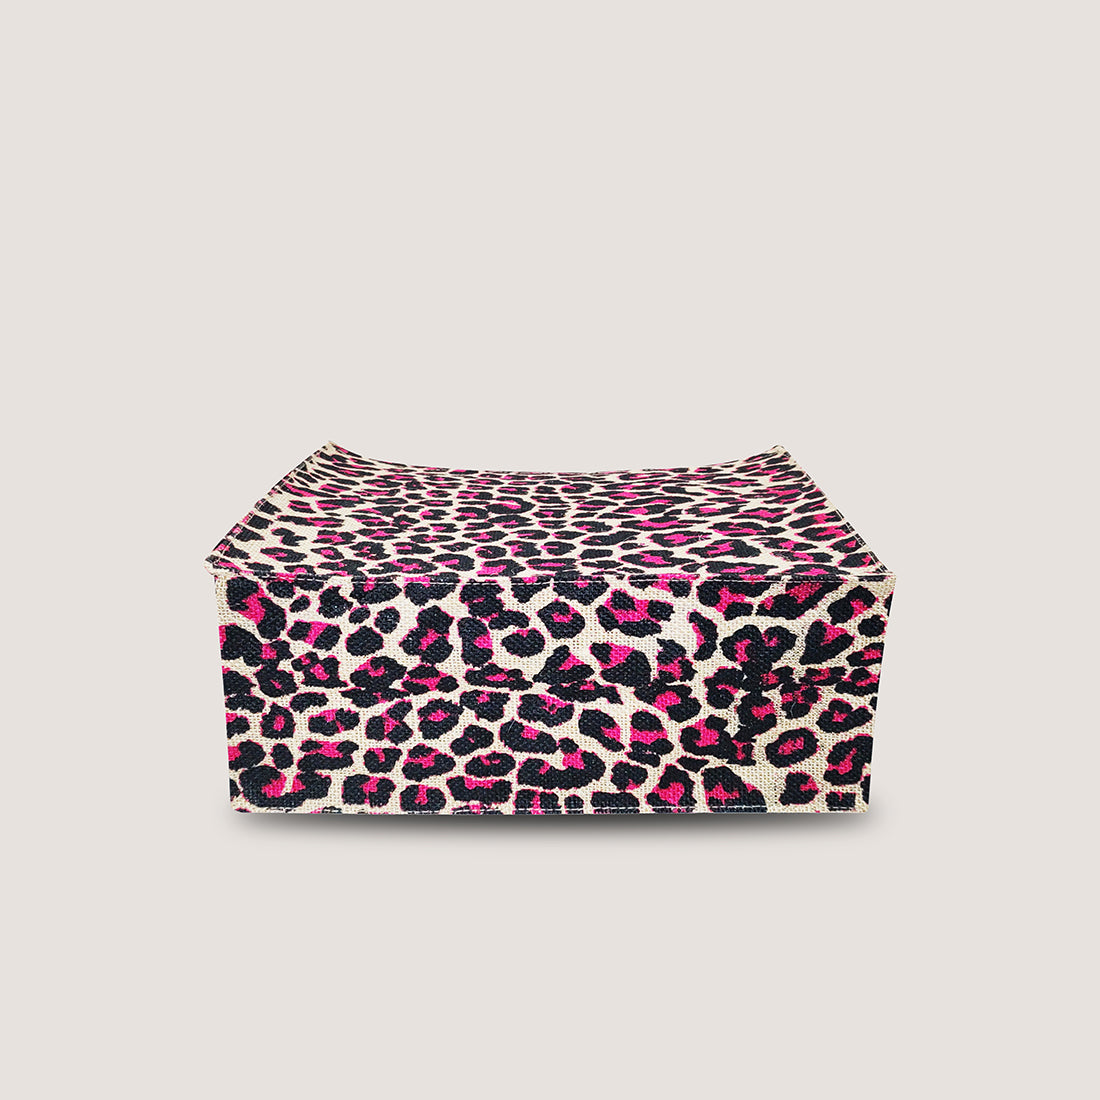 EARTHBAGS LEOPARD PRINTED LUNCH BAGS WITH PADDED HANDLES